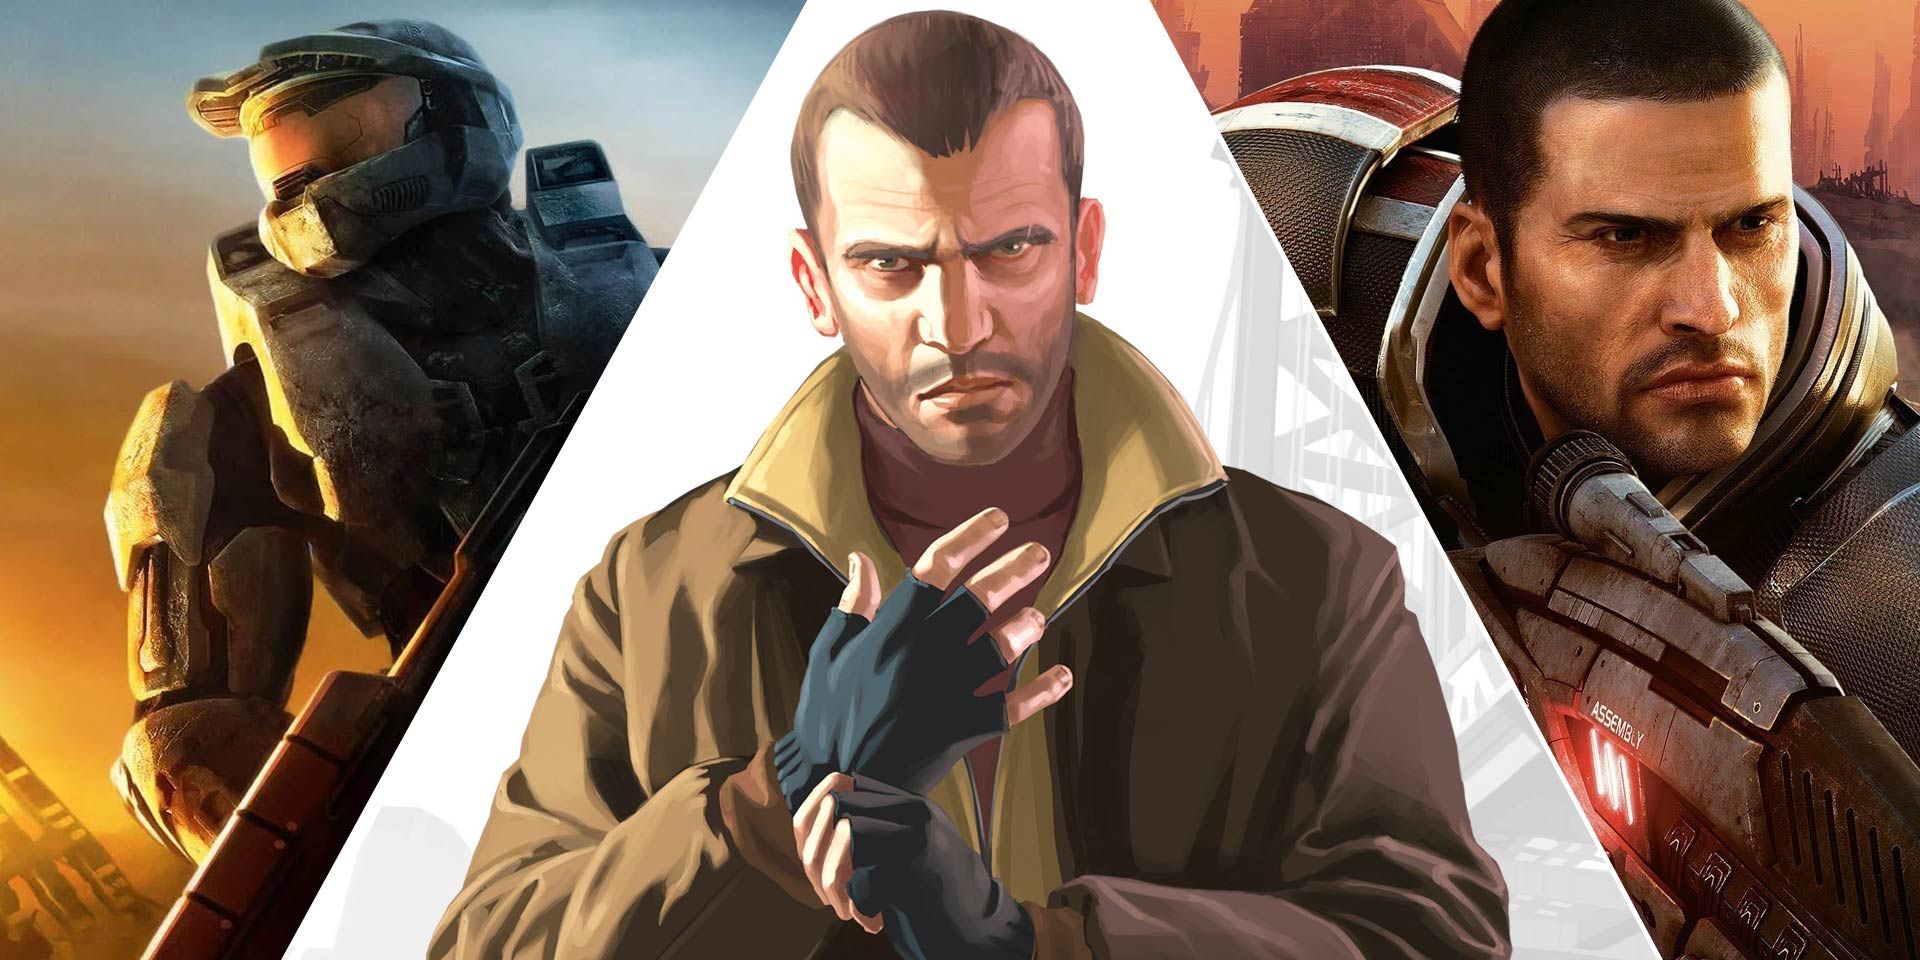 A split image featuring Master Chief from Halo 3 (left), Niko Bellic from GTA IV (middle), and Commander Shepard from Mass Effect (right).